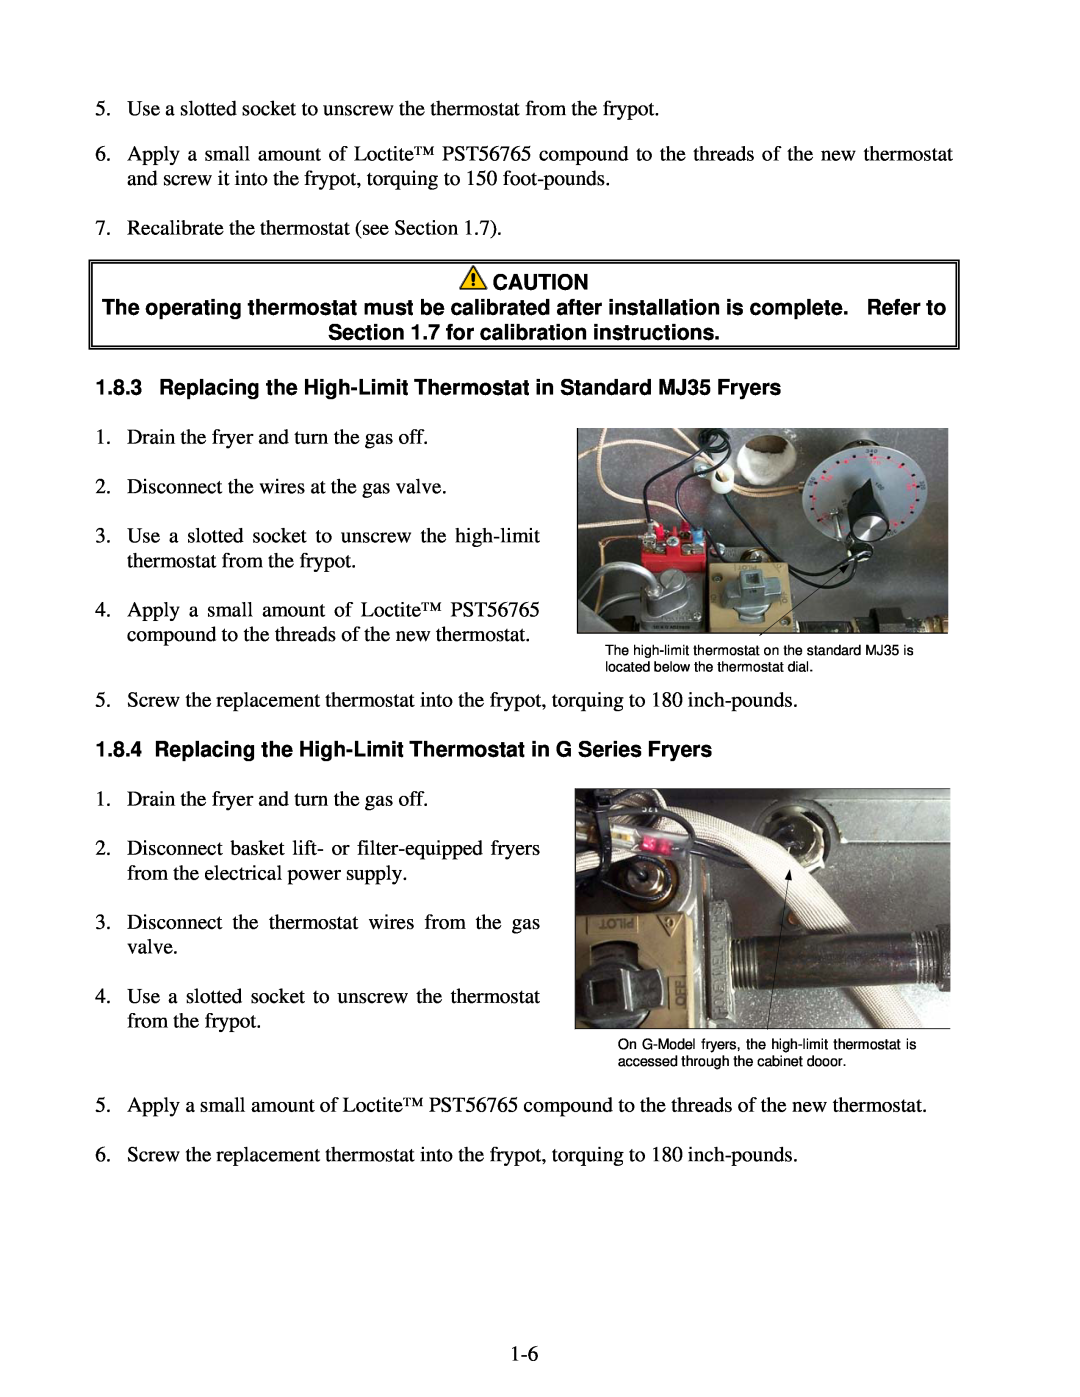 Frymaster 35 Series manual 7 for calibration instructions 